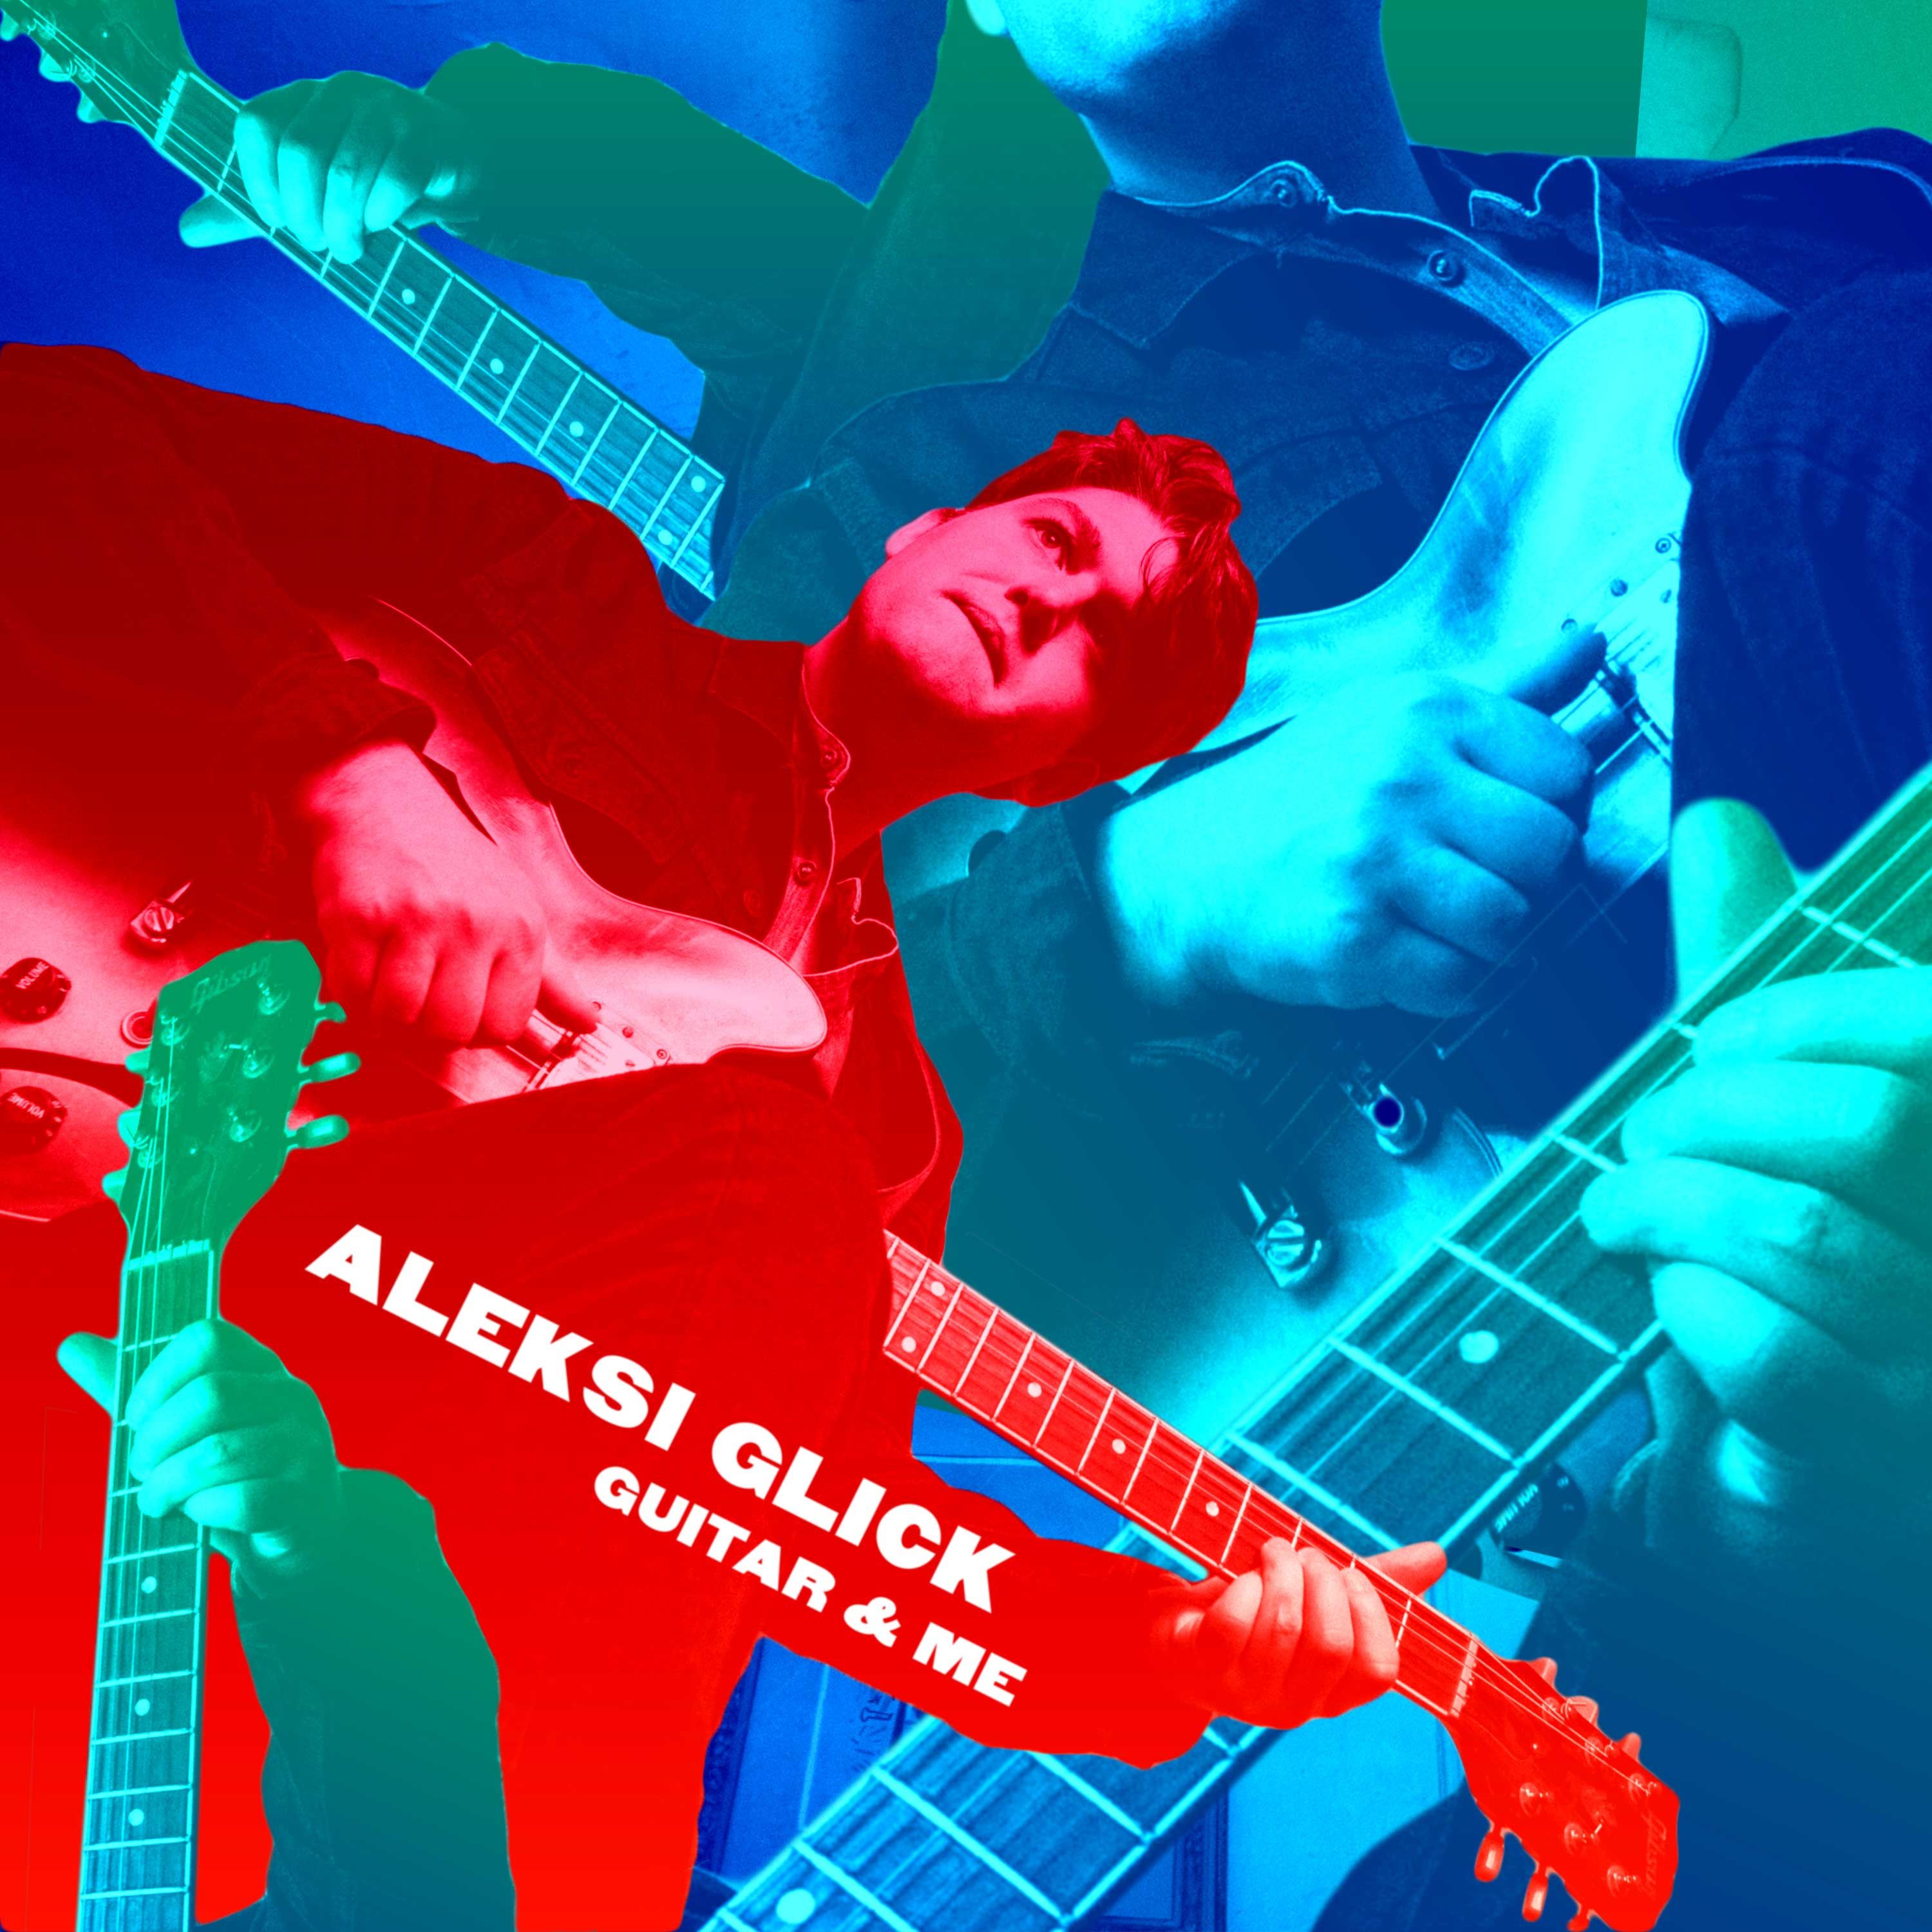 Debut Solo Release from Guitarist Aleksi Glick Out Now